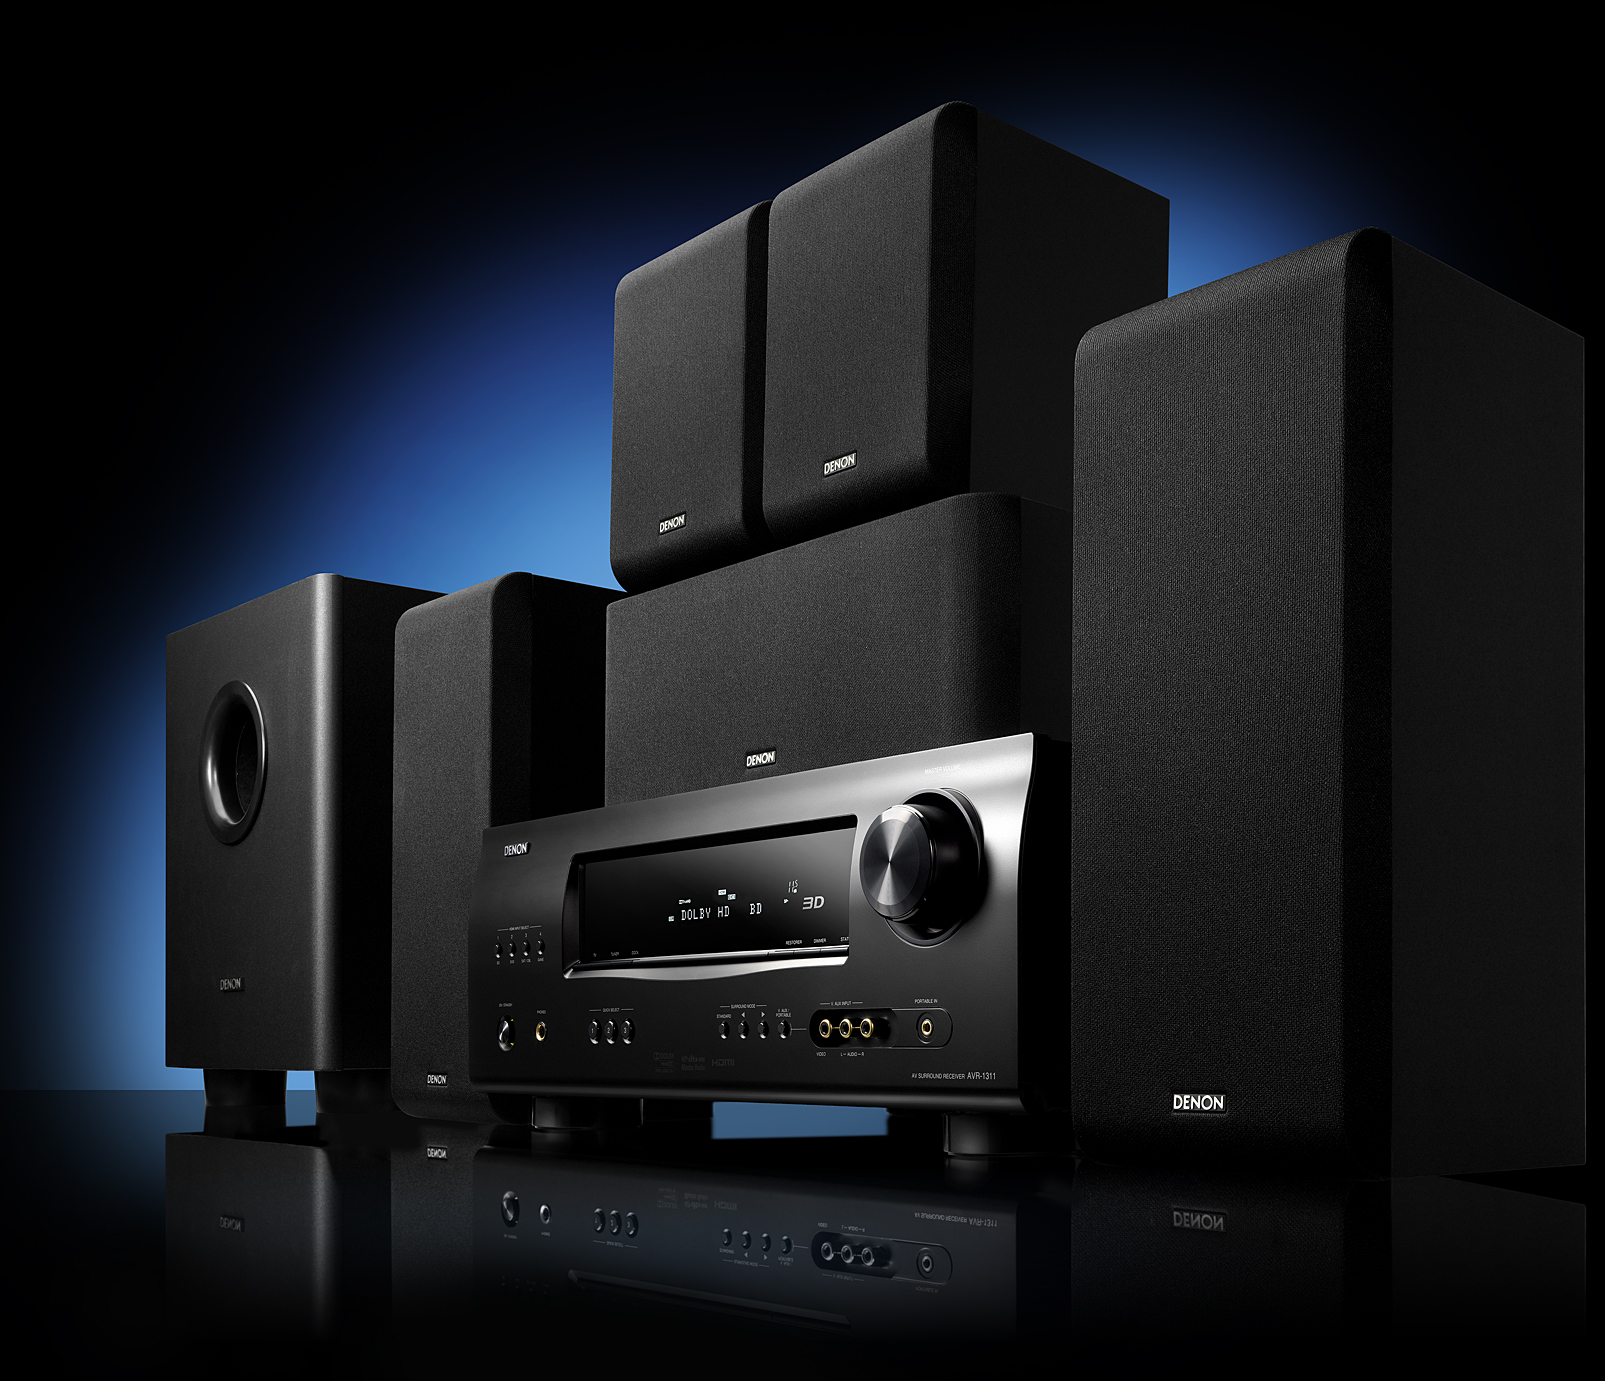 Denon Home Theatre System Connected Magazine | peacecommission.kdsg.gov.ng